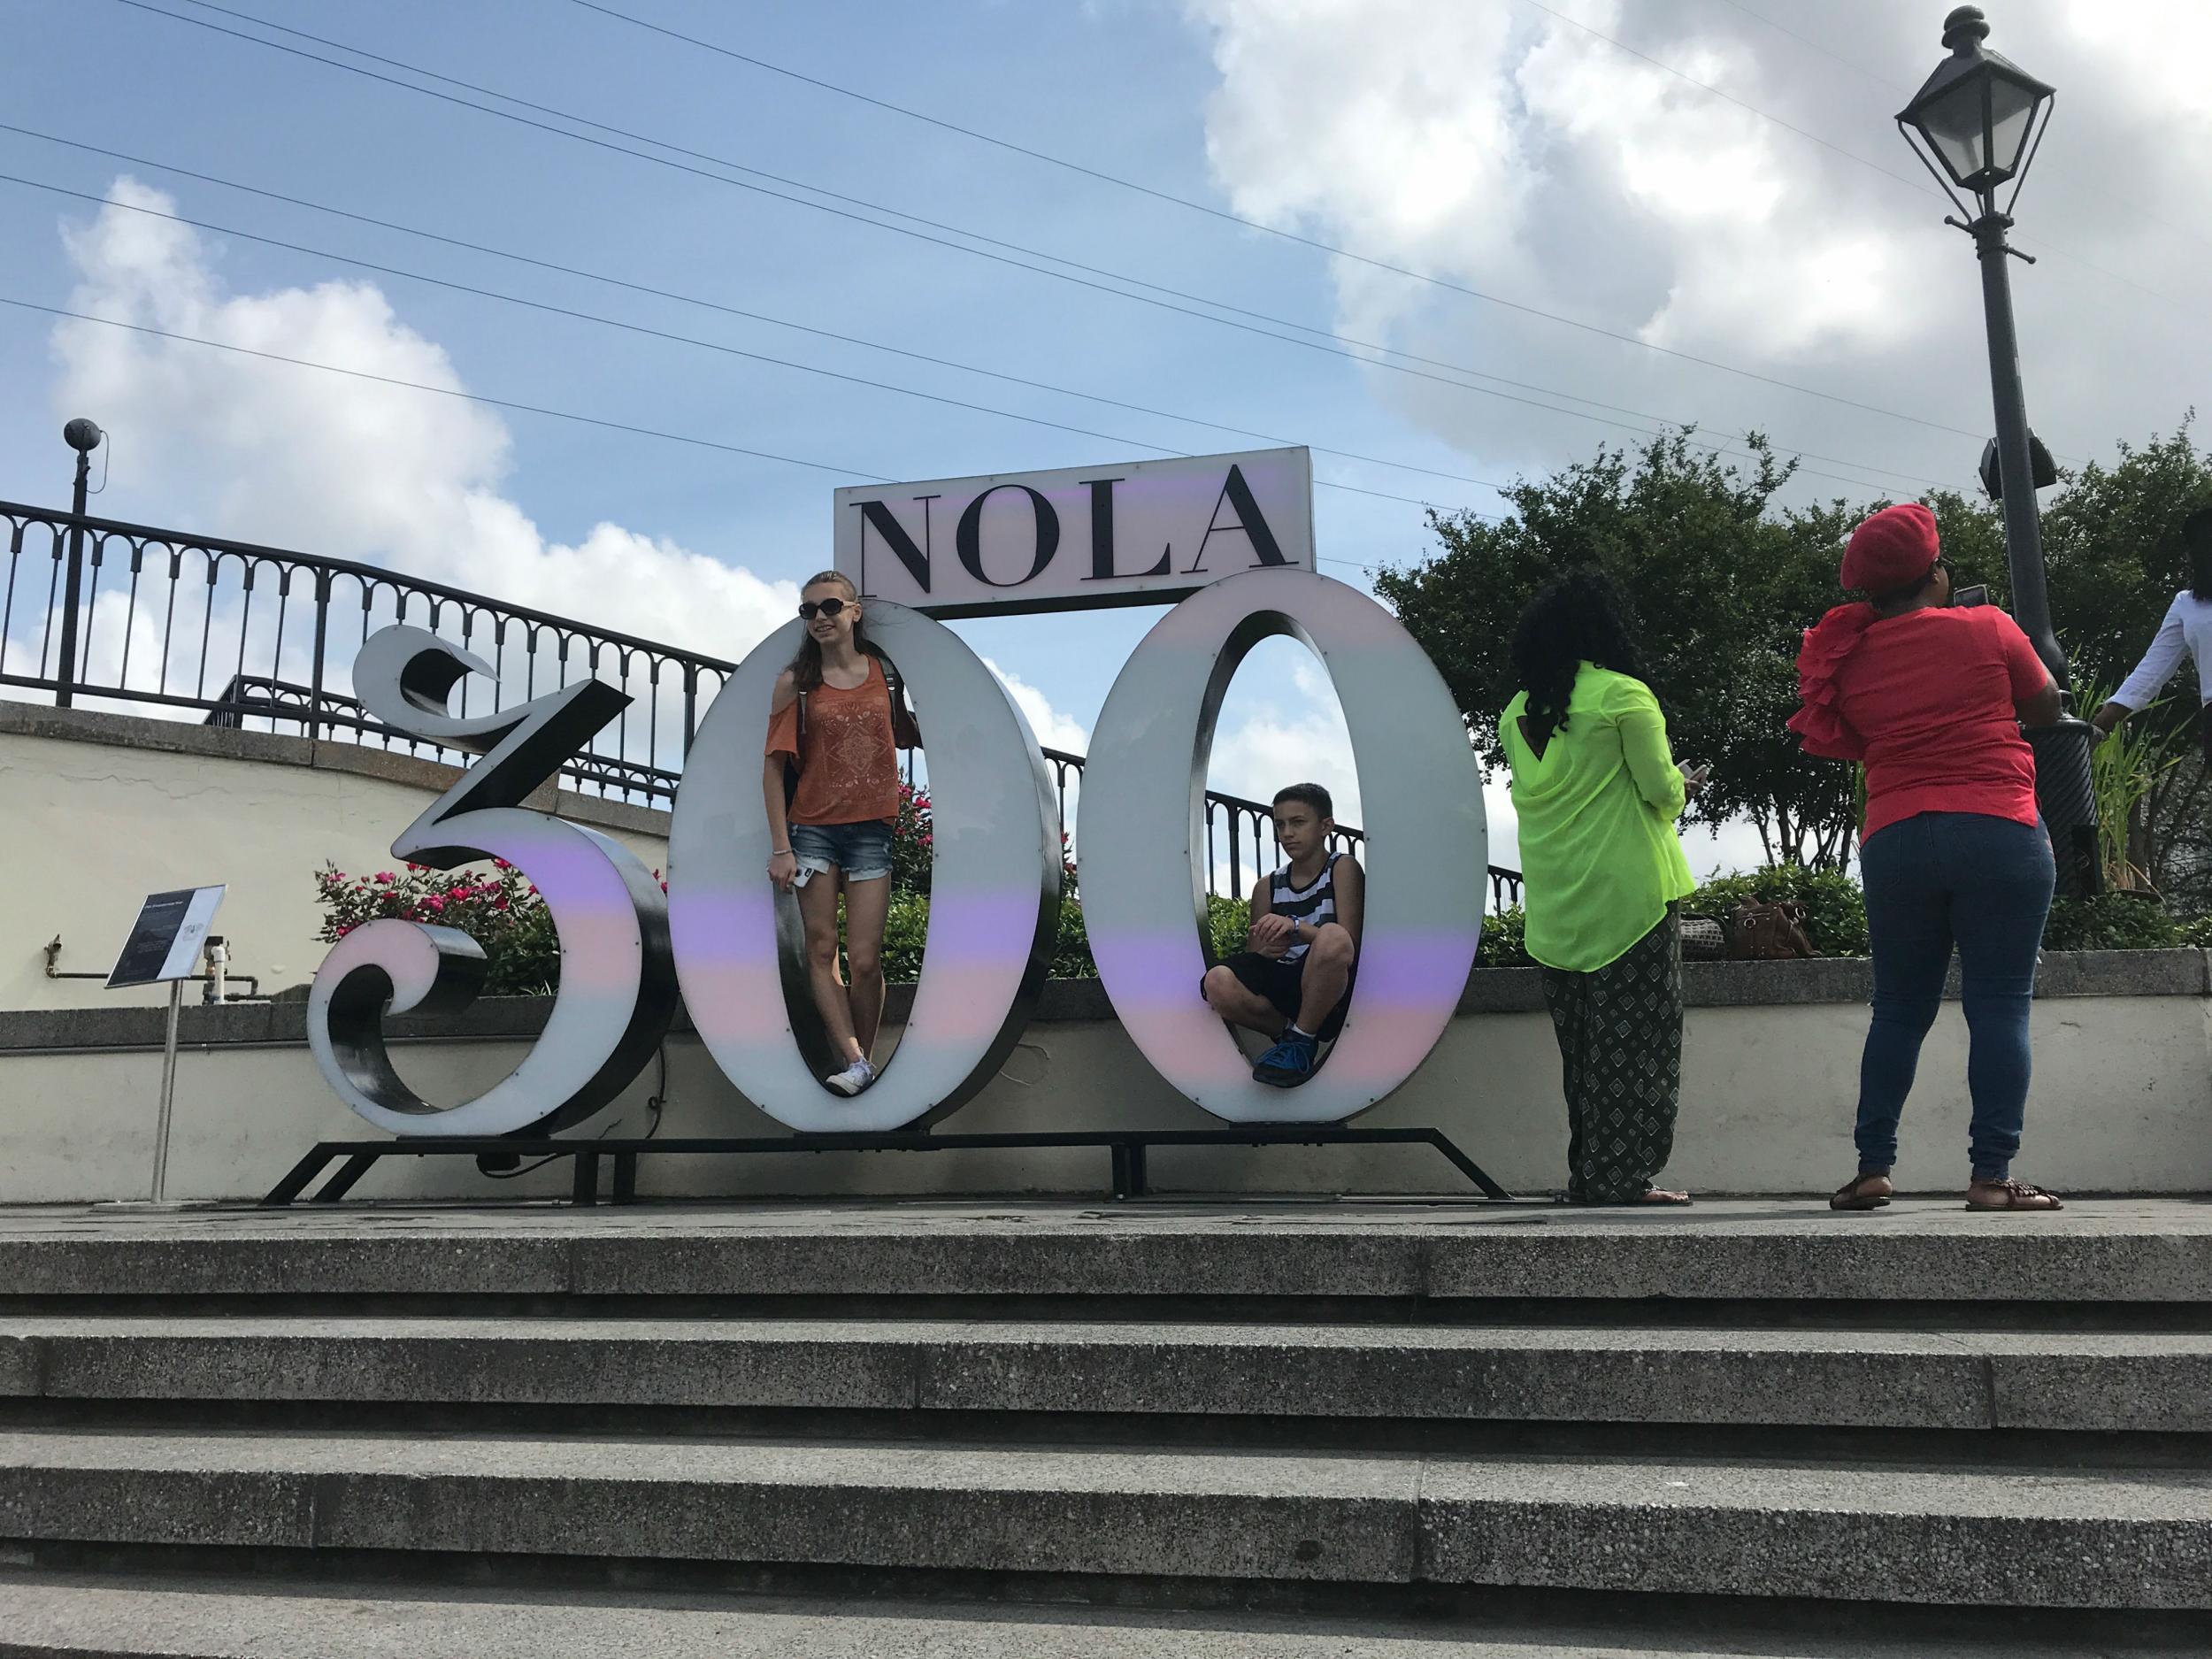 New Orleans celebrates its 300th birthday in 2018